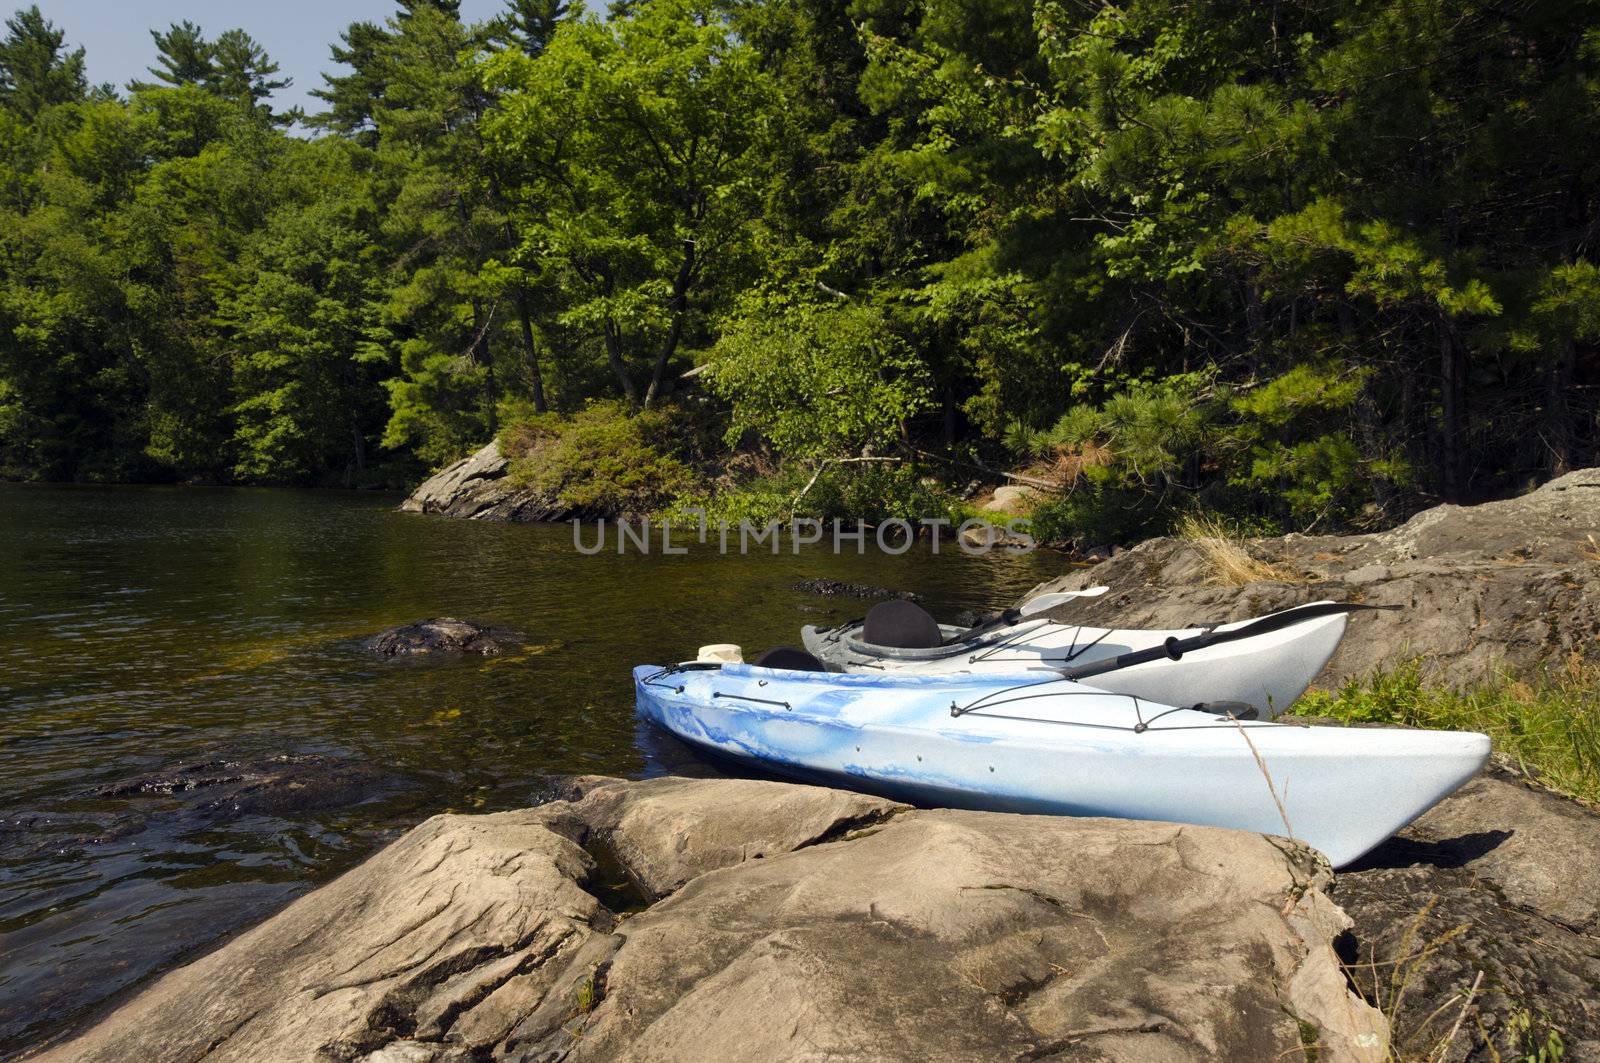 Two kayaks on the rocky shoreline of a northern lake